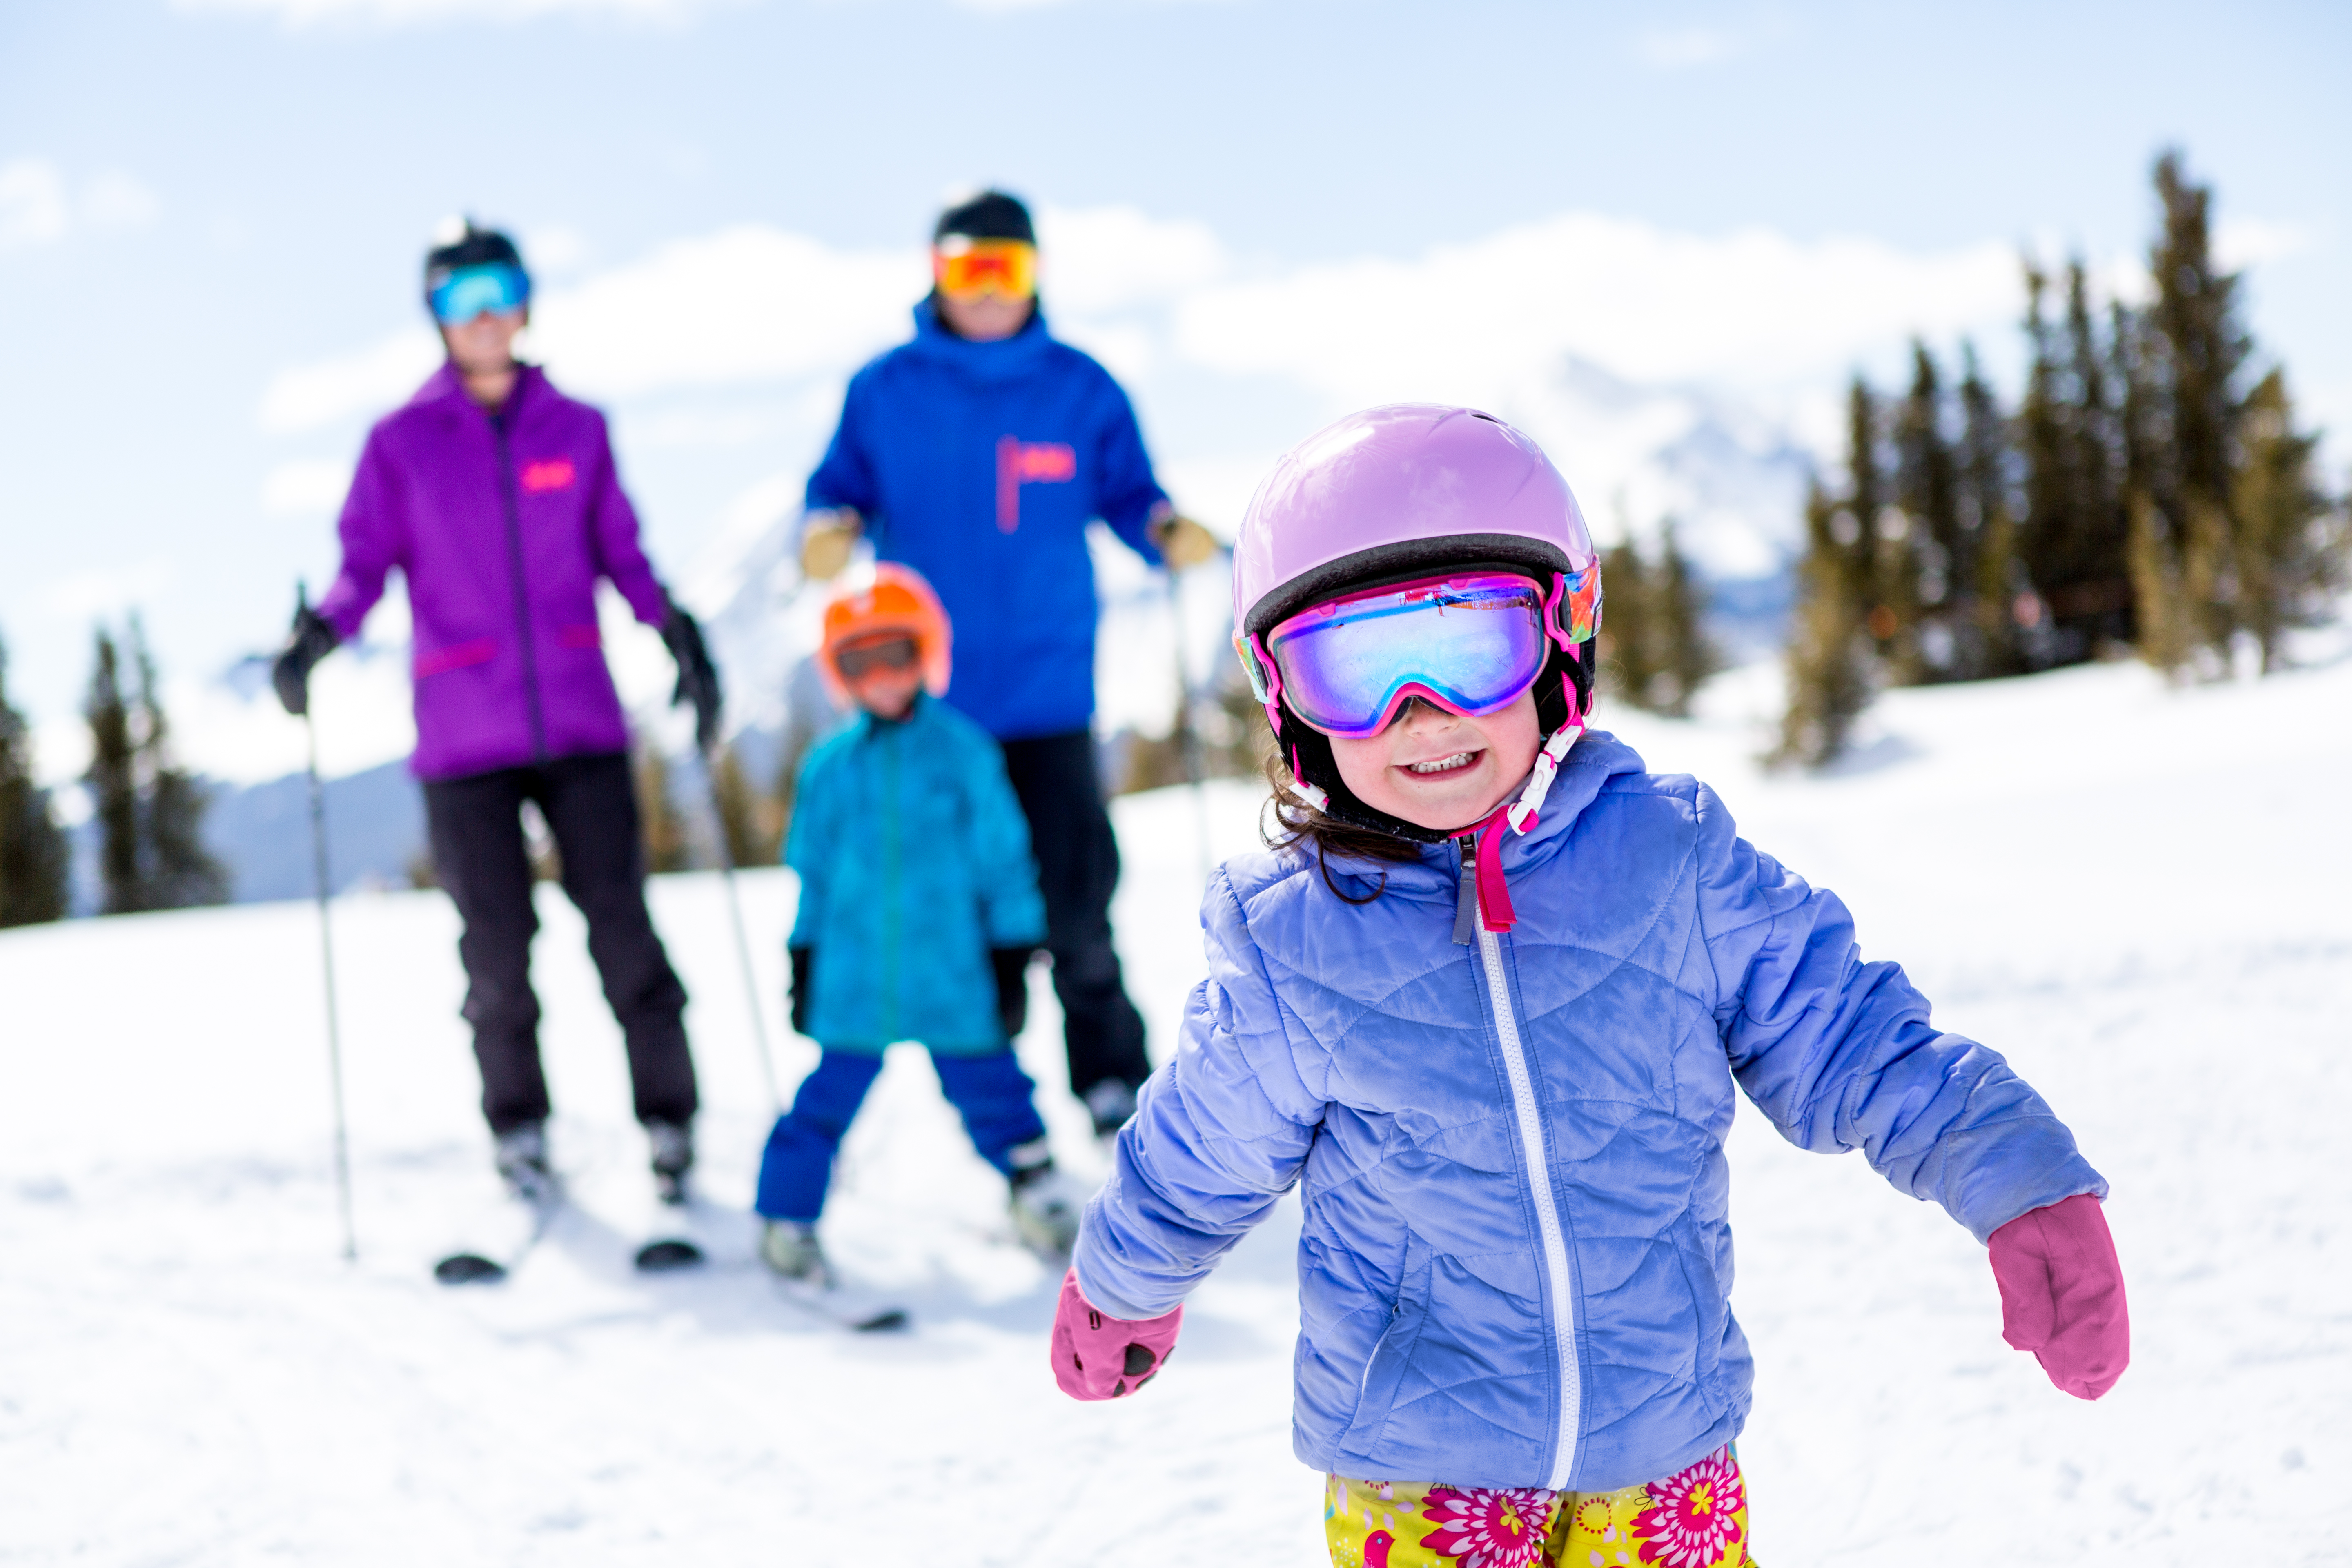 Family-Friendly Ski Areas Near NYC For Your Next Winter, 45% OFF